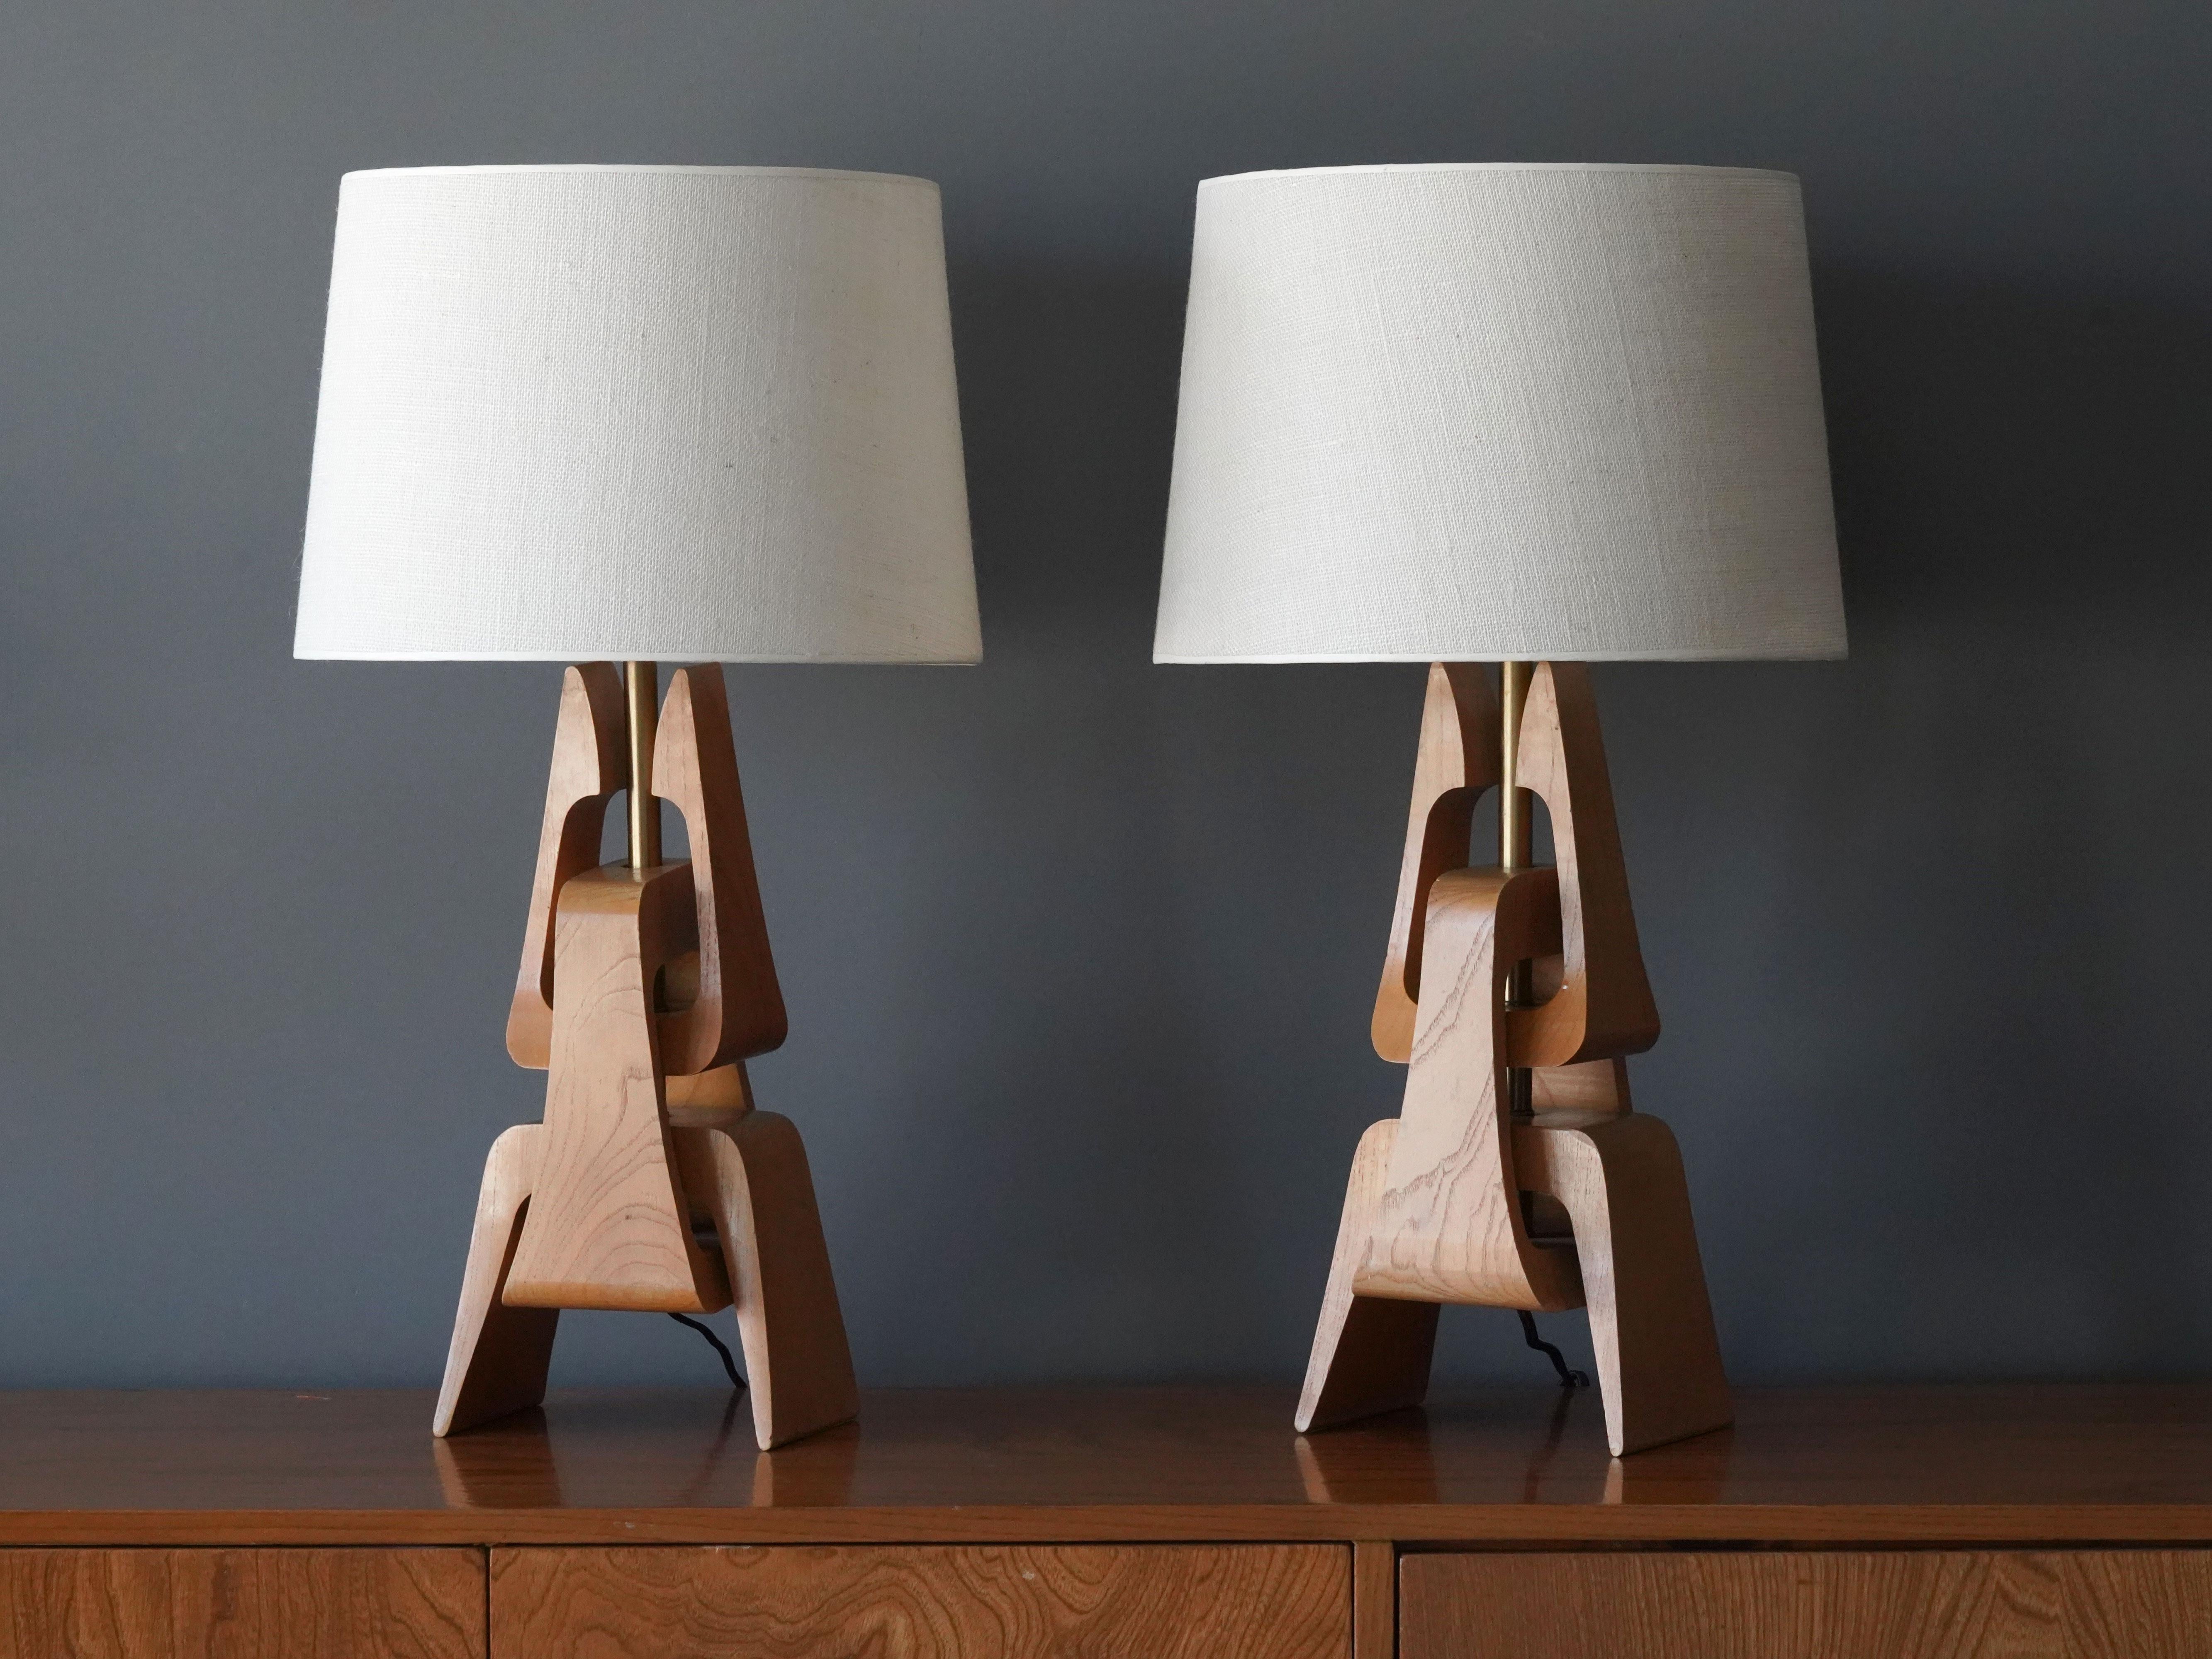 A pair of modernist table lamps. Designed by an unknown designer, America, 1950s. Intricate sculptured oak parts are joined on a brass rod.  Sold without lampshades.

Other designers of the period include Paul Laszlo, Paul Frankl, Isamu Noguchi,